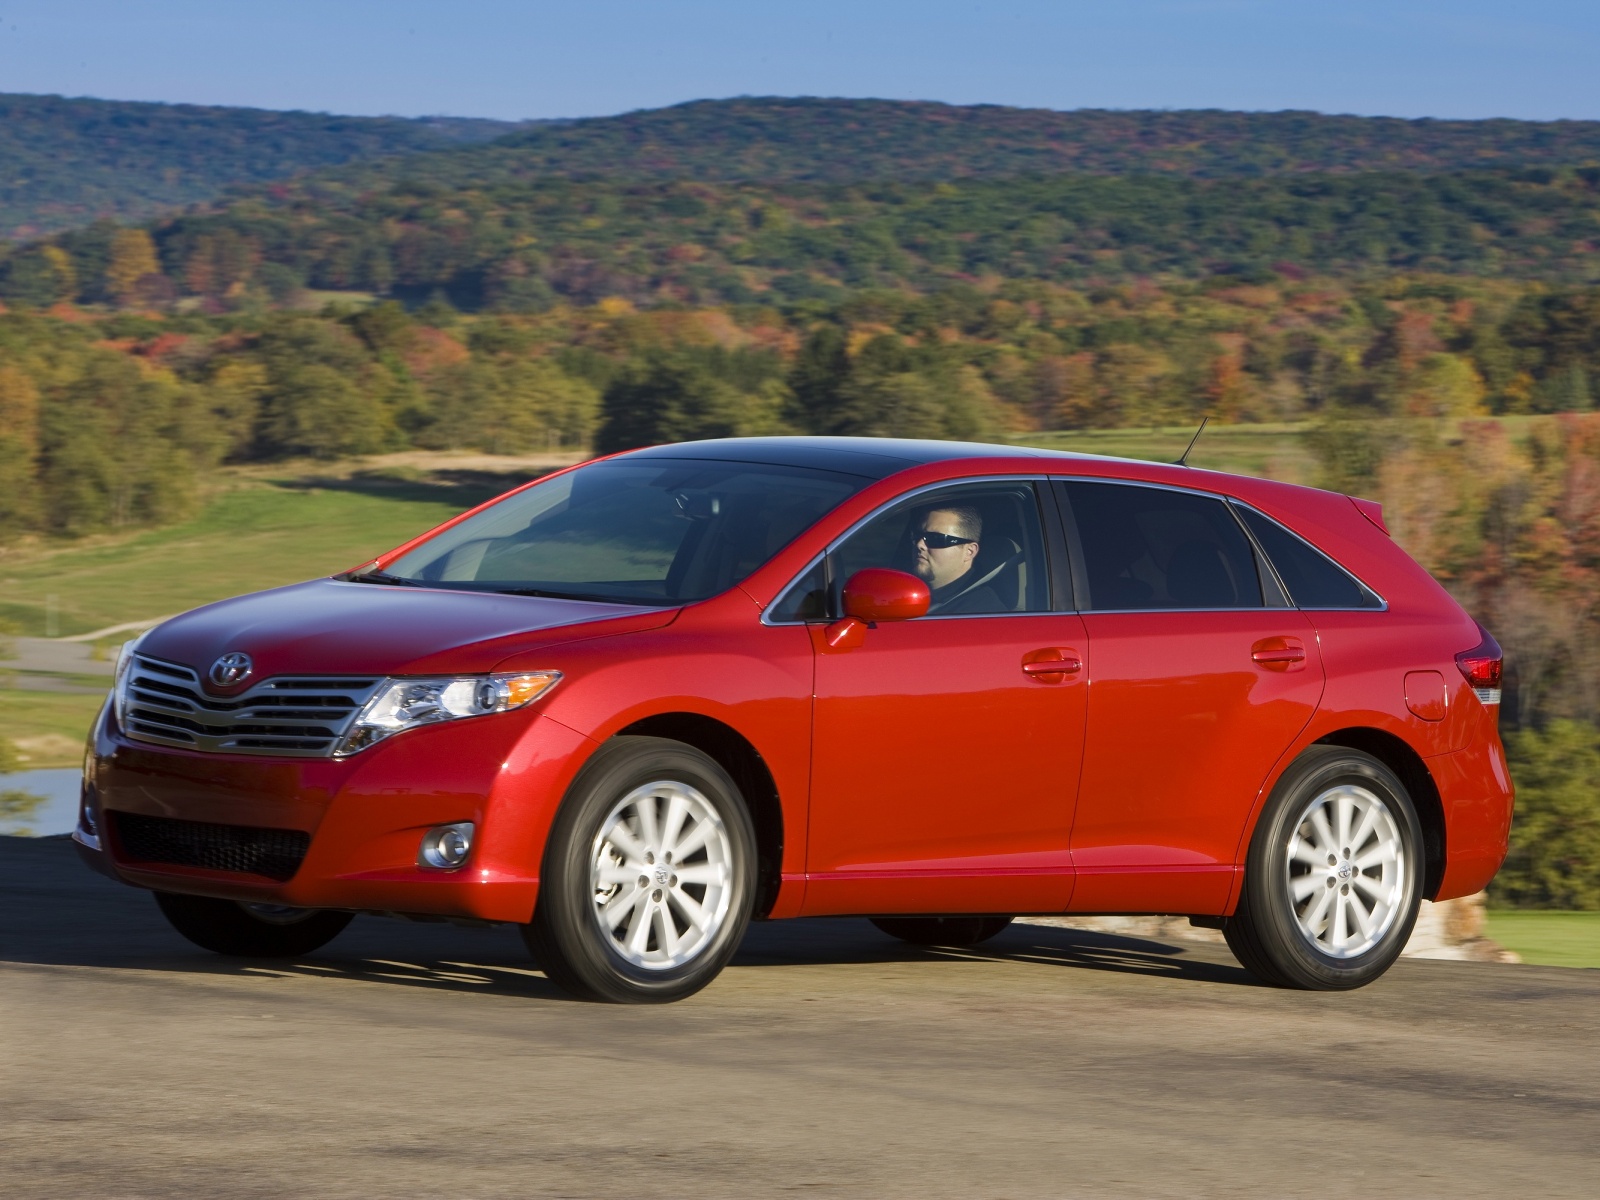 2009 toyota venza specifications #6